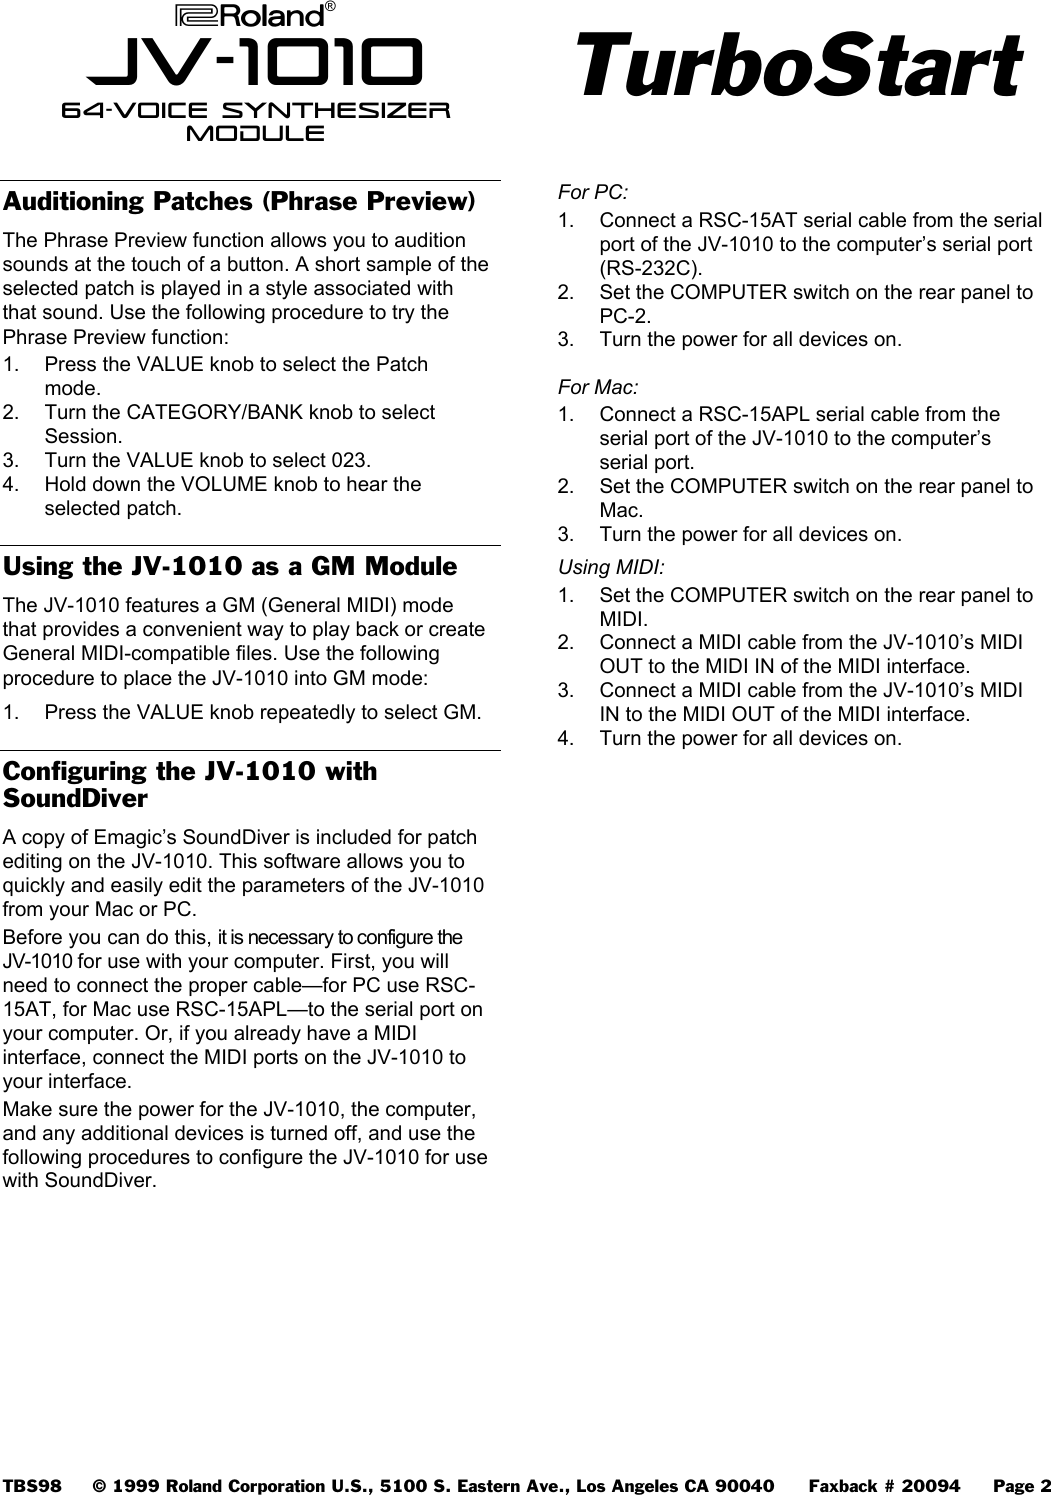 Page 2 of 2 - Roland JV1010 JV-1010 TurboStart User Manual  To The Accc105a-ef9d-4df4-a1ae-325c9a74302f